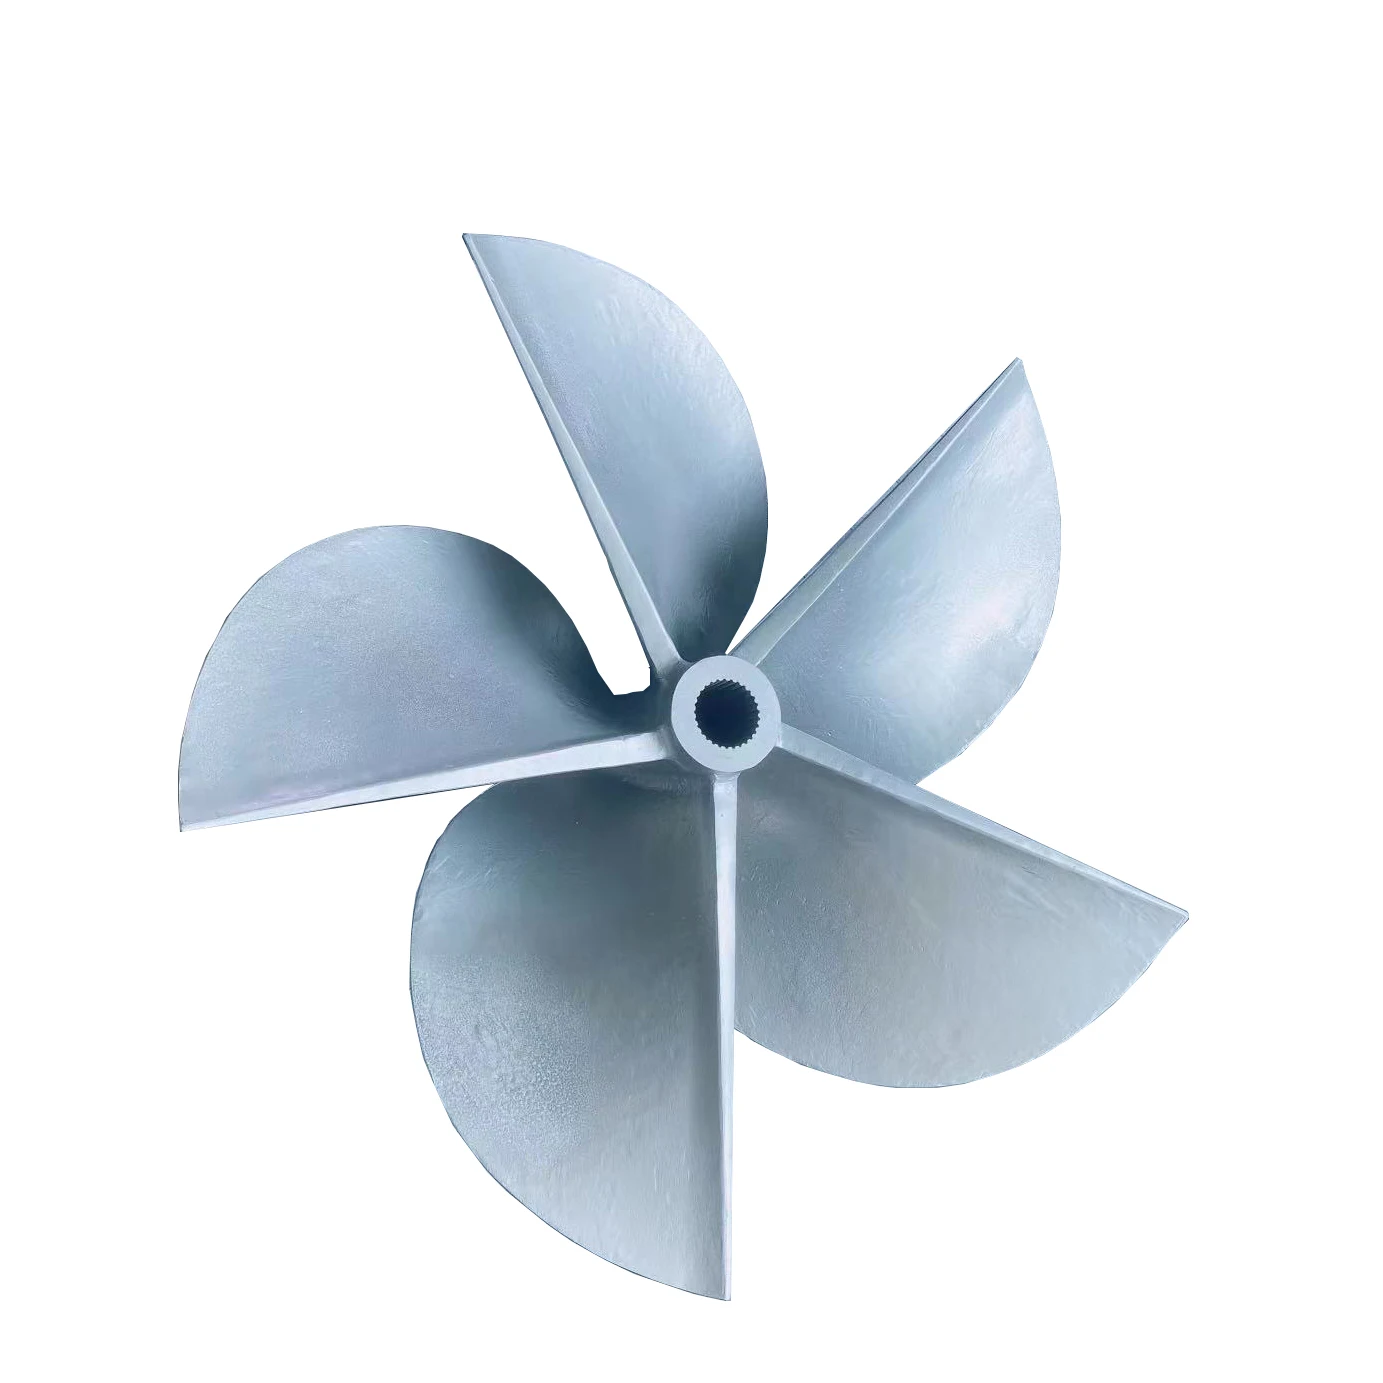 BH400 Brand new high quality four blades Stainless Steel type and special design for Outboard marine propeller